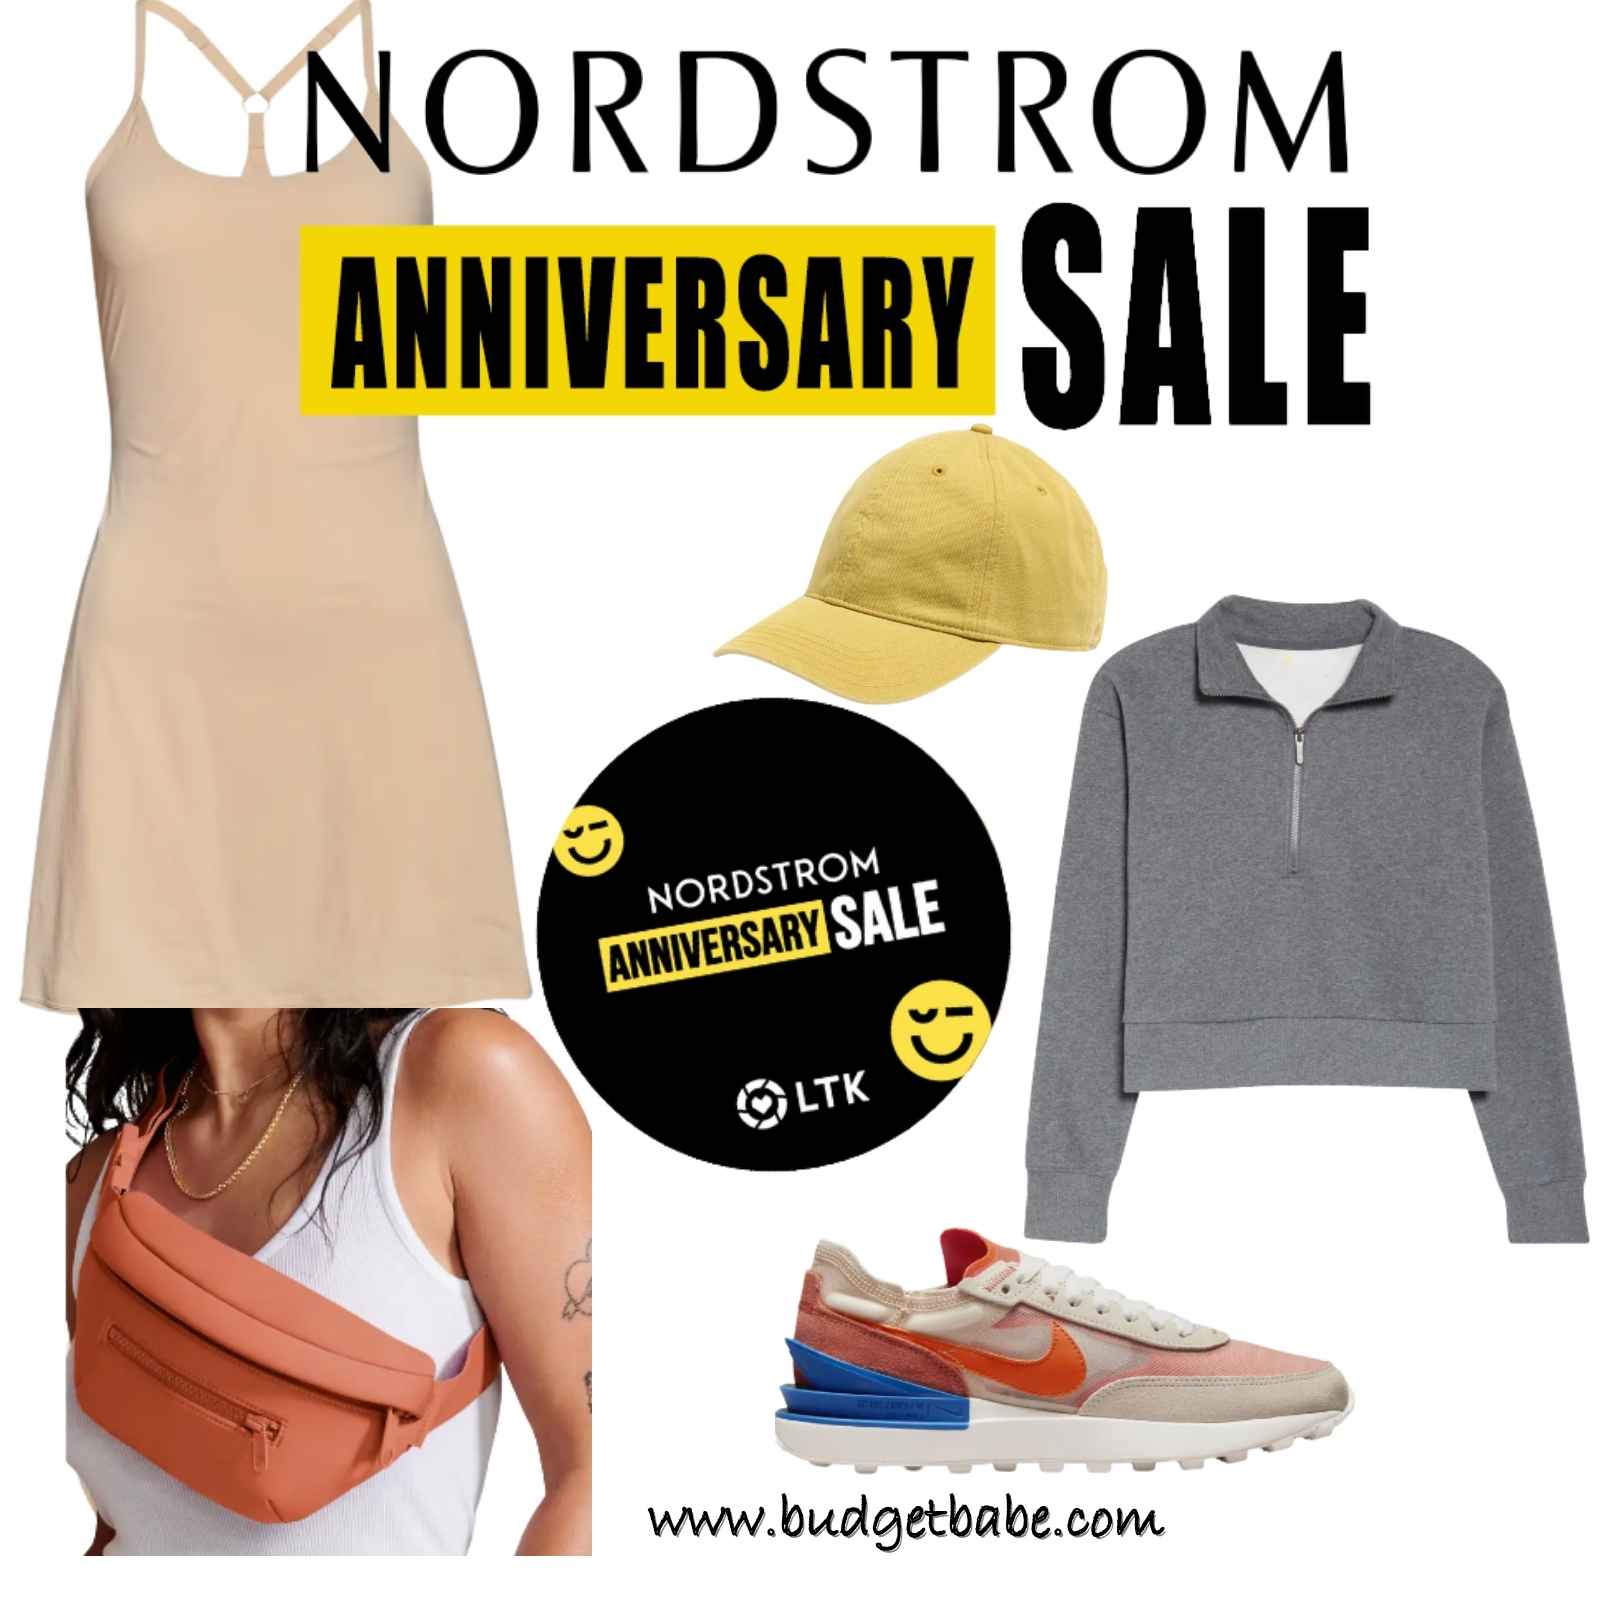 Outfit ideas from Nordstrom Anniversary Sale - athleisure dress, half zip, sneakers